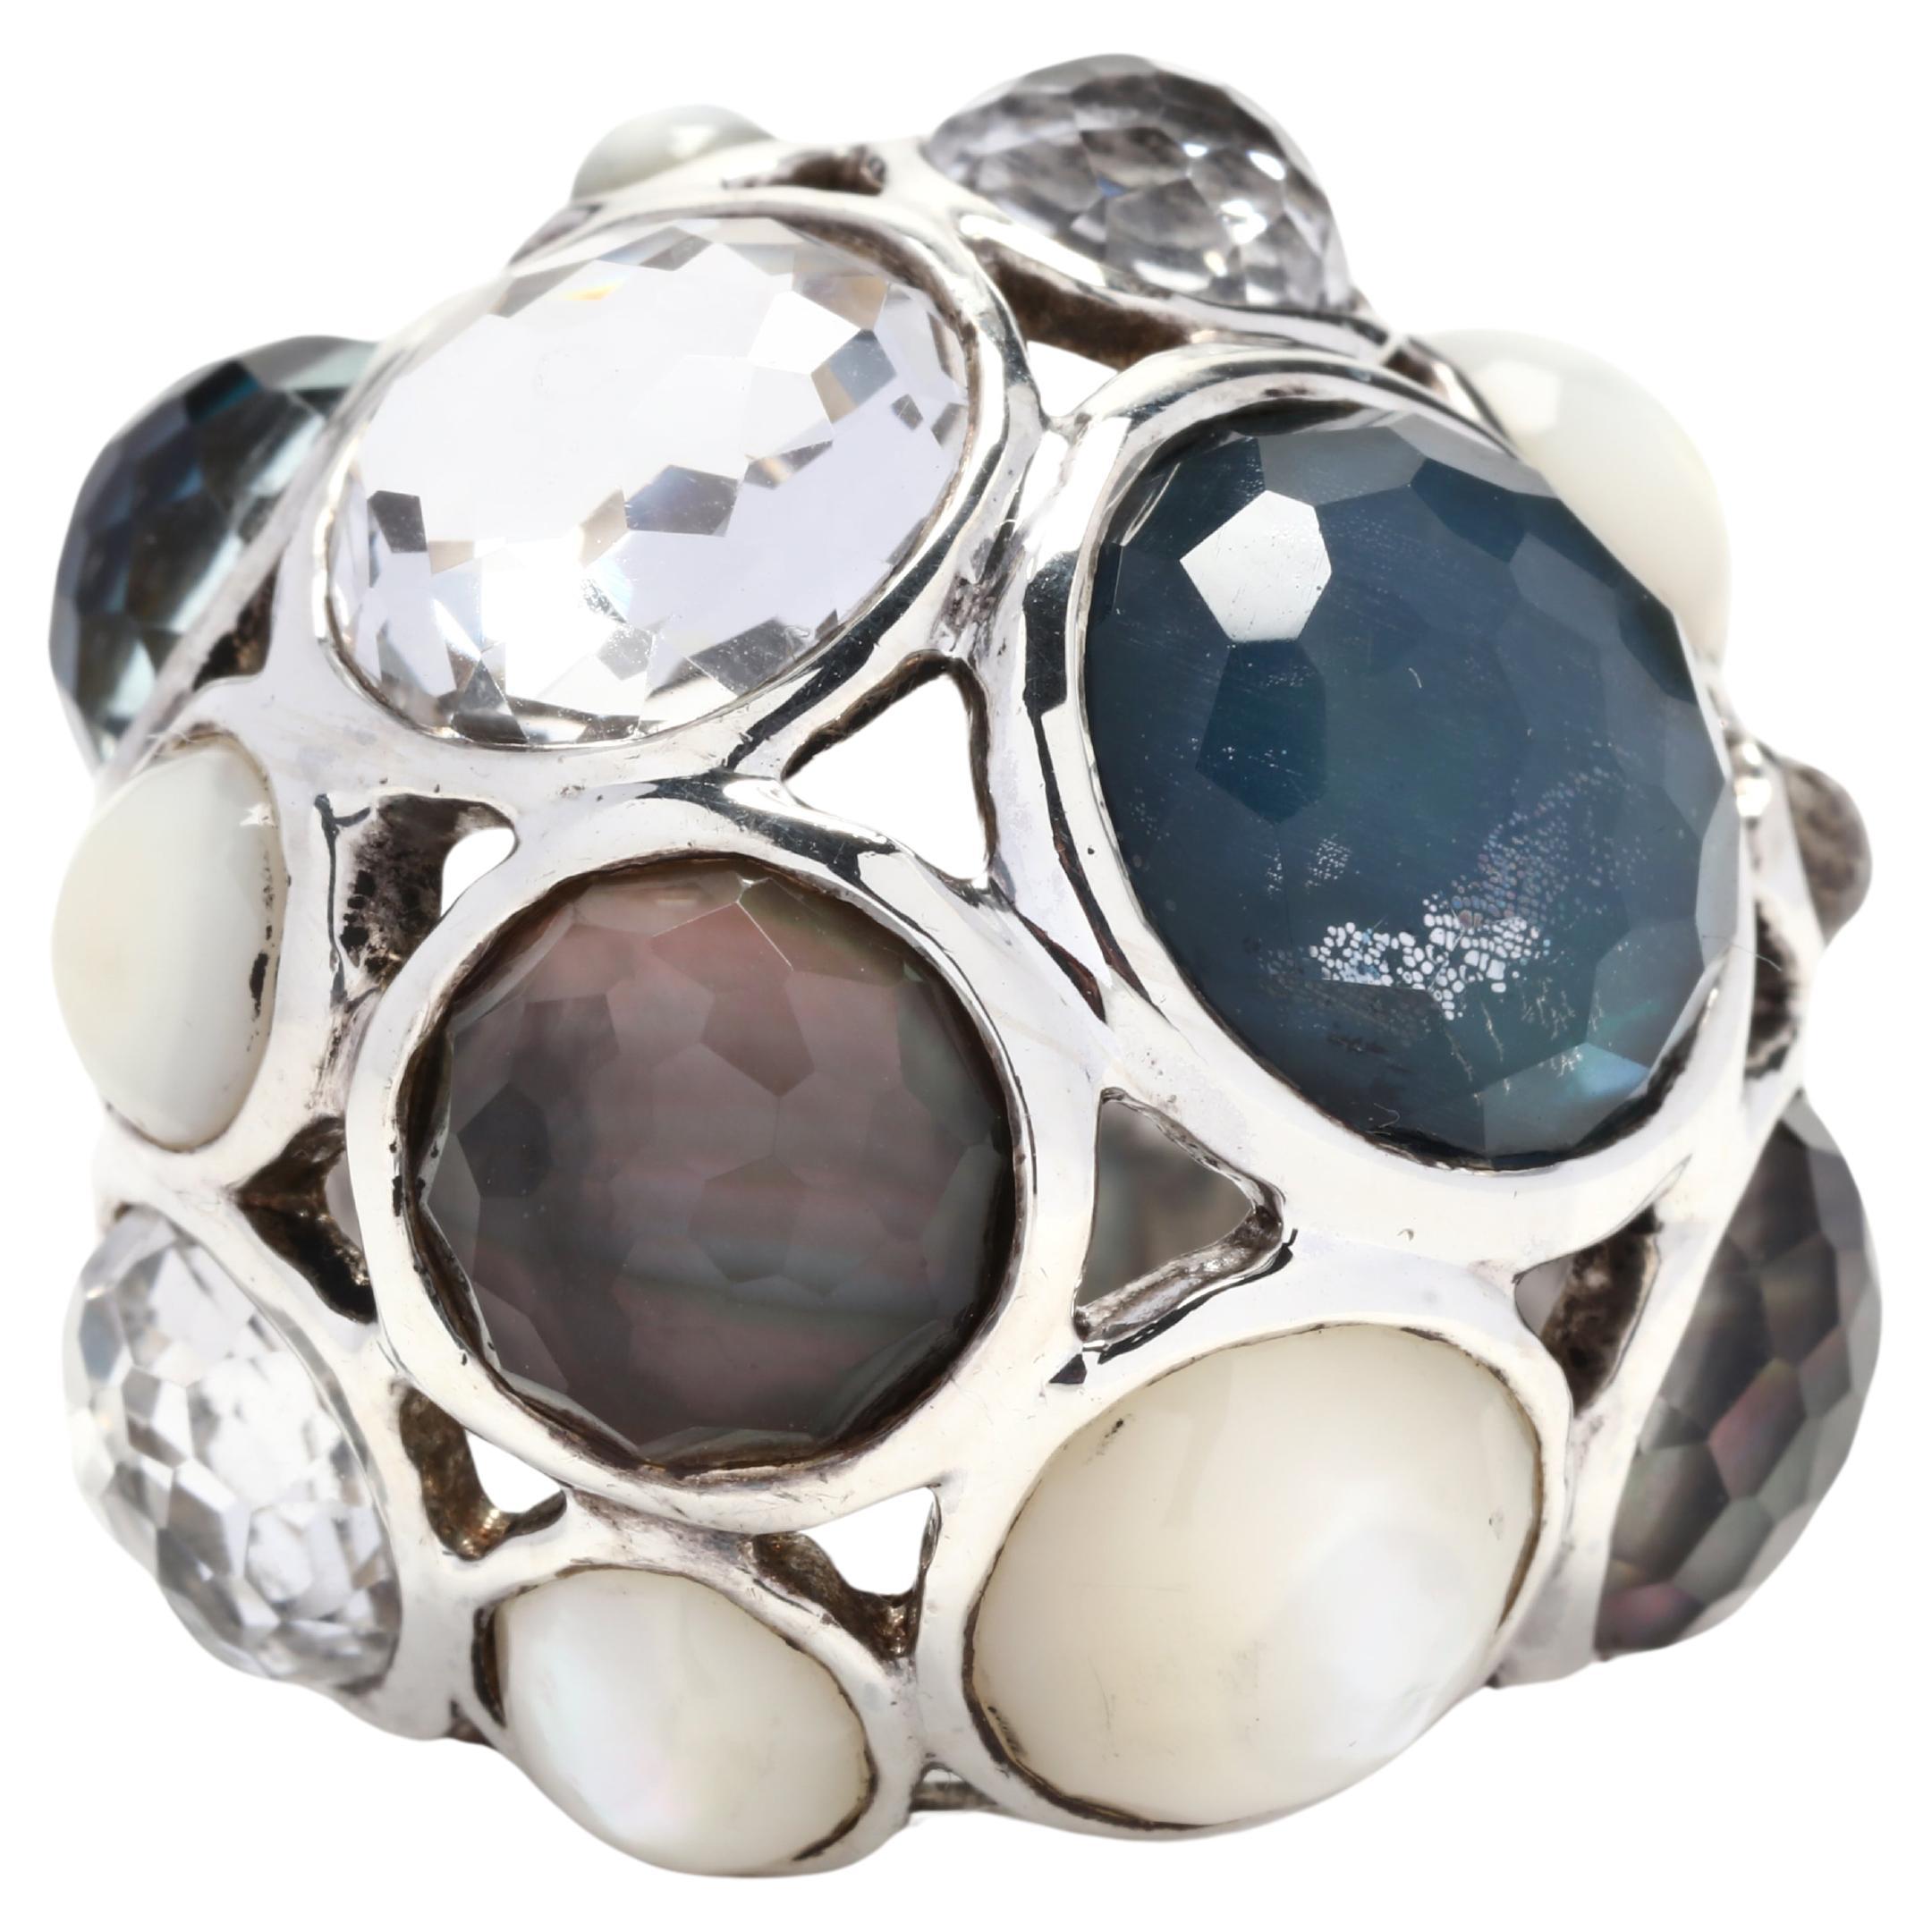 Ippolita Rock Candy Blue Dome Ring, Sterling Silver, Ring Size 6.25, Quartz 